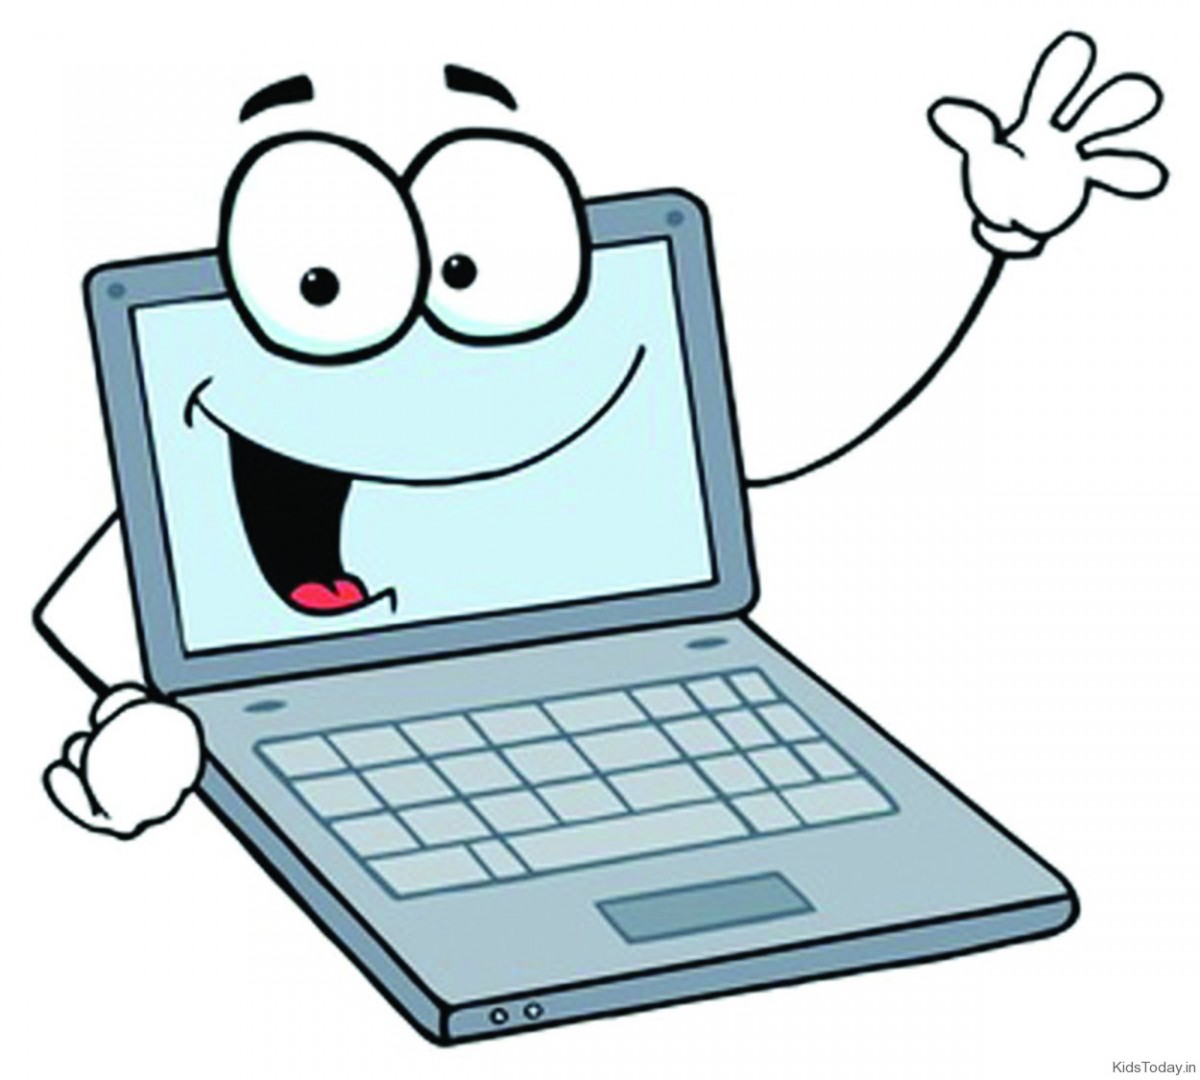 clipart of laptops - photo #36